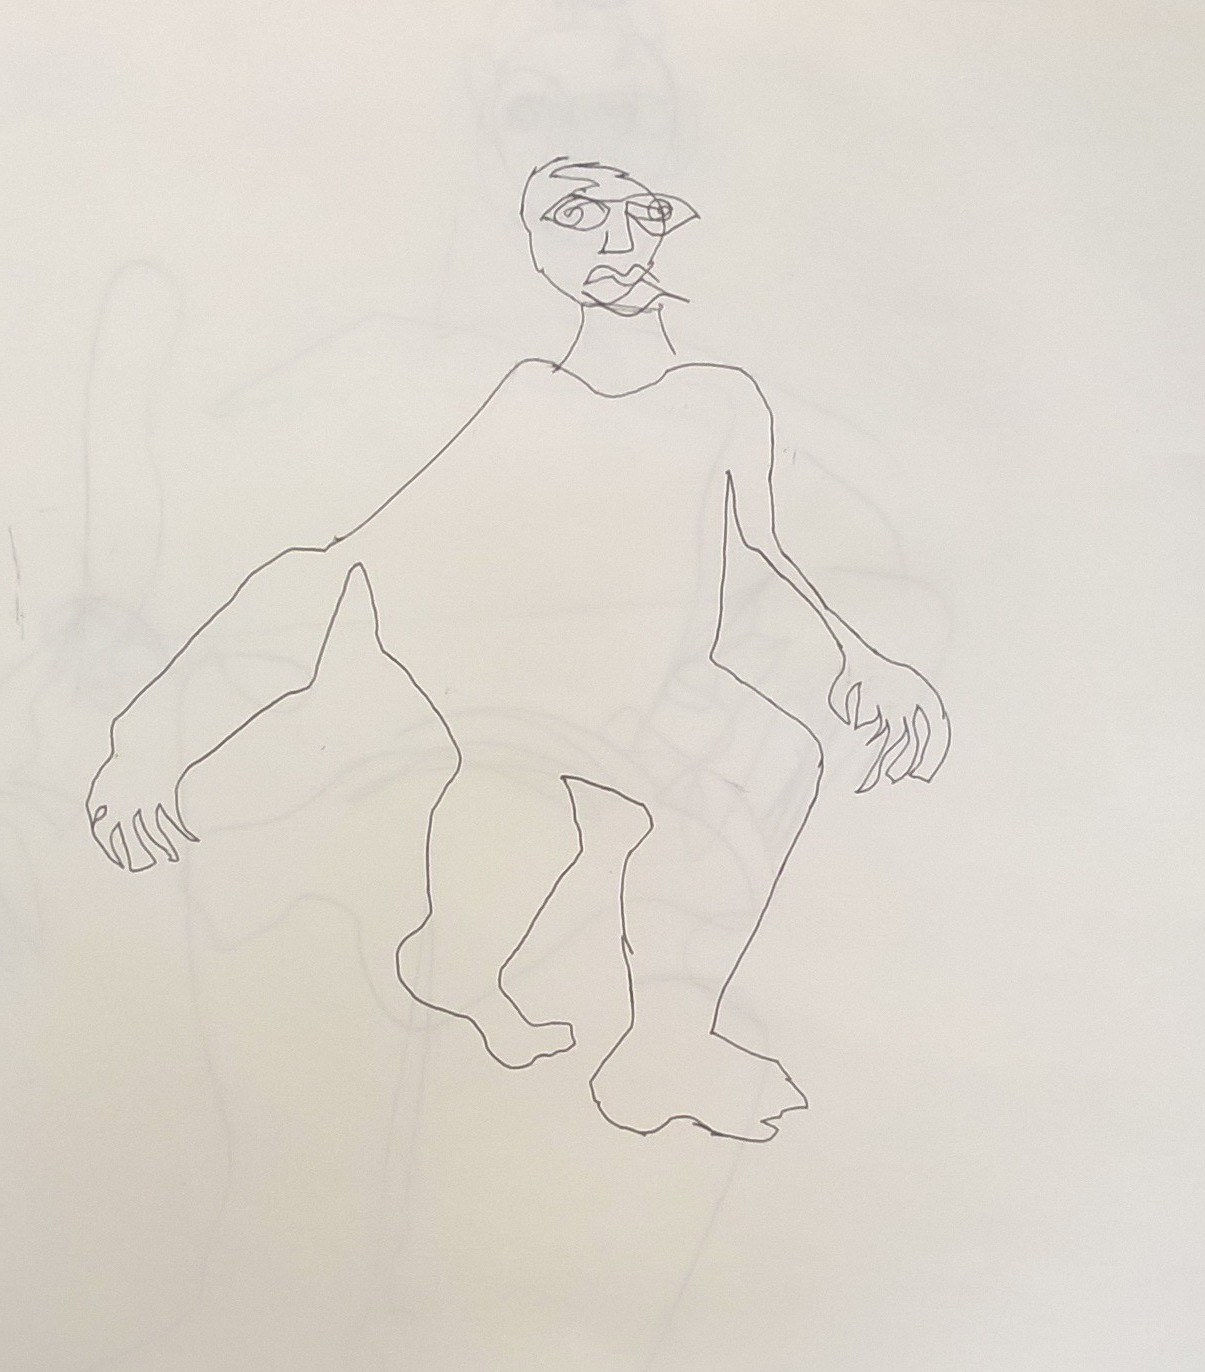 Blind drawing 1